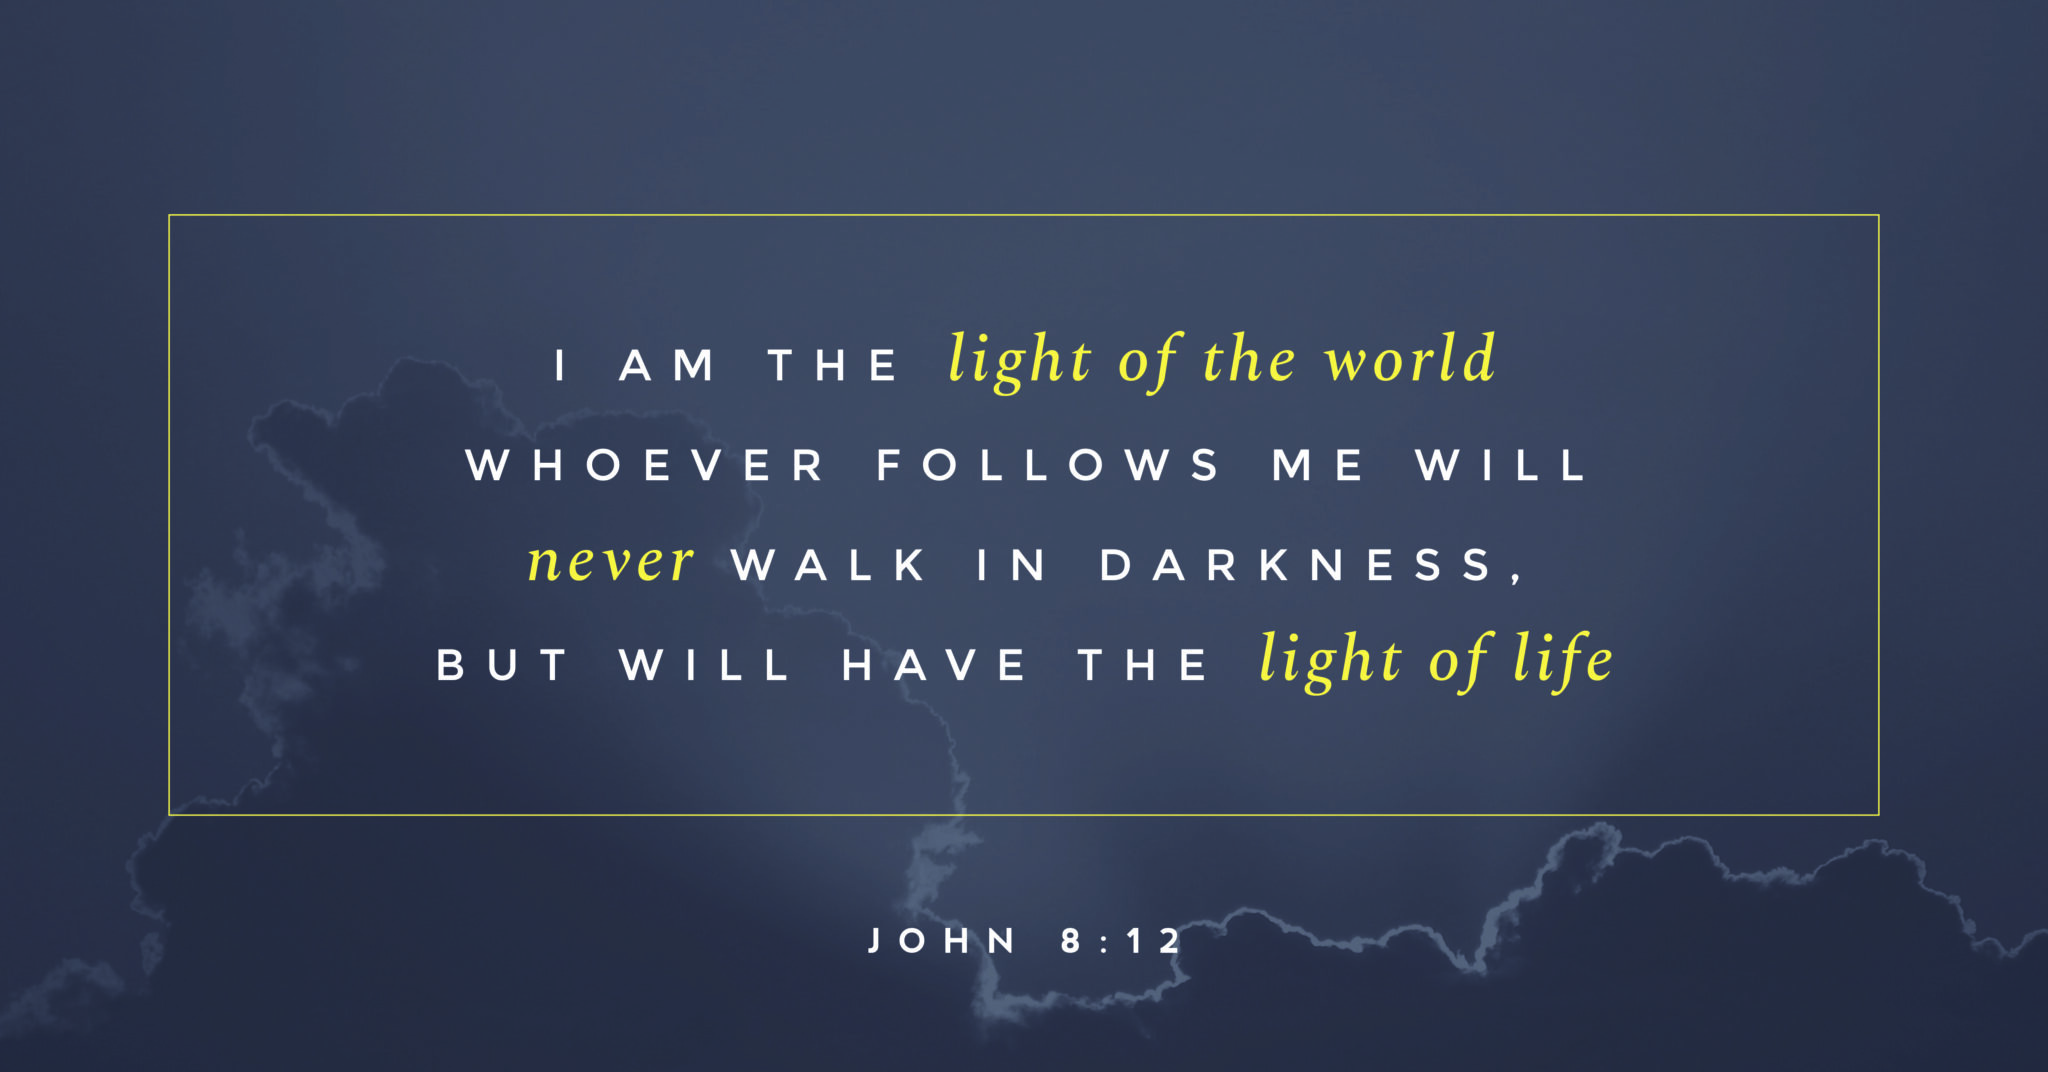 A picture of clouds with the text "I am the light of the world whoever follows me will never walk in darkness, but will have the light of life. John 8:12"